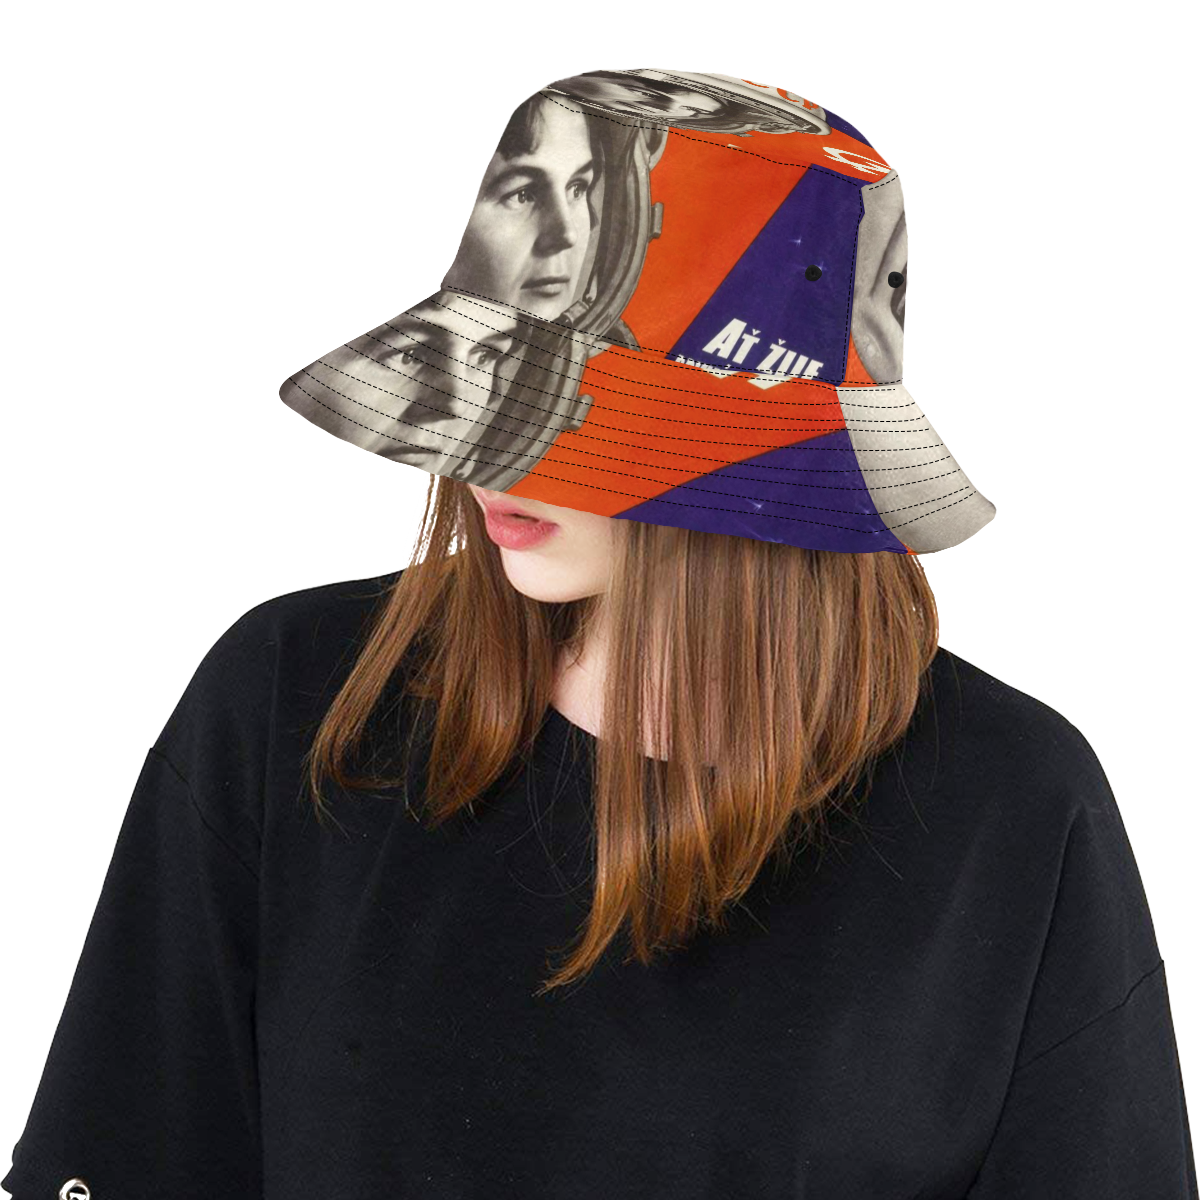 Glory to the first woman cosmonaut! All Over Print Bucket Hat